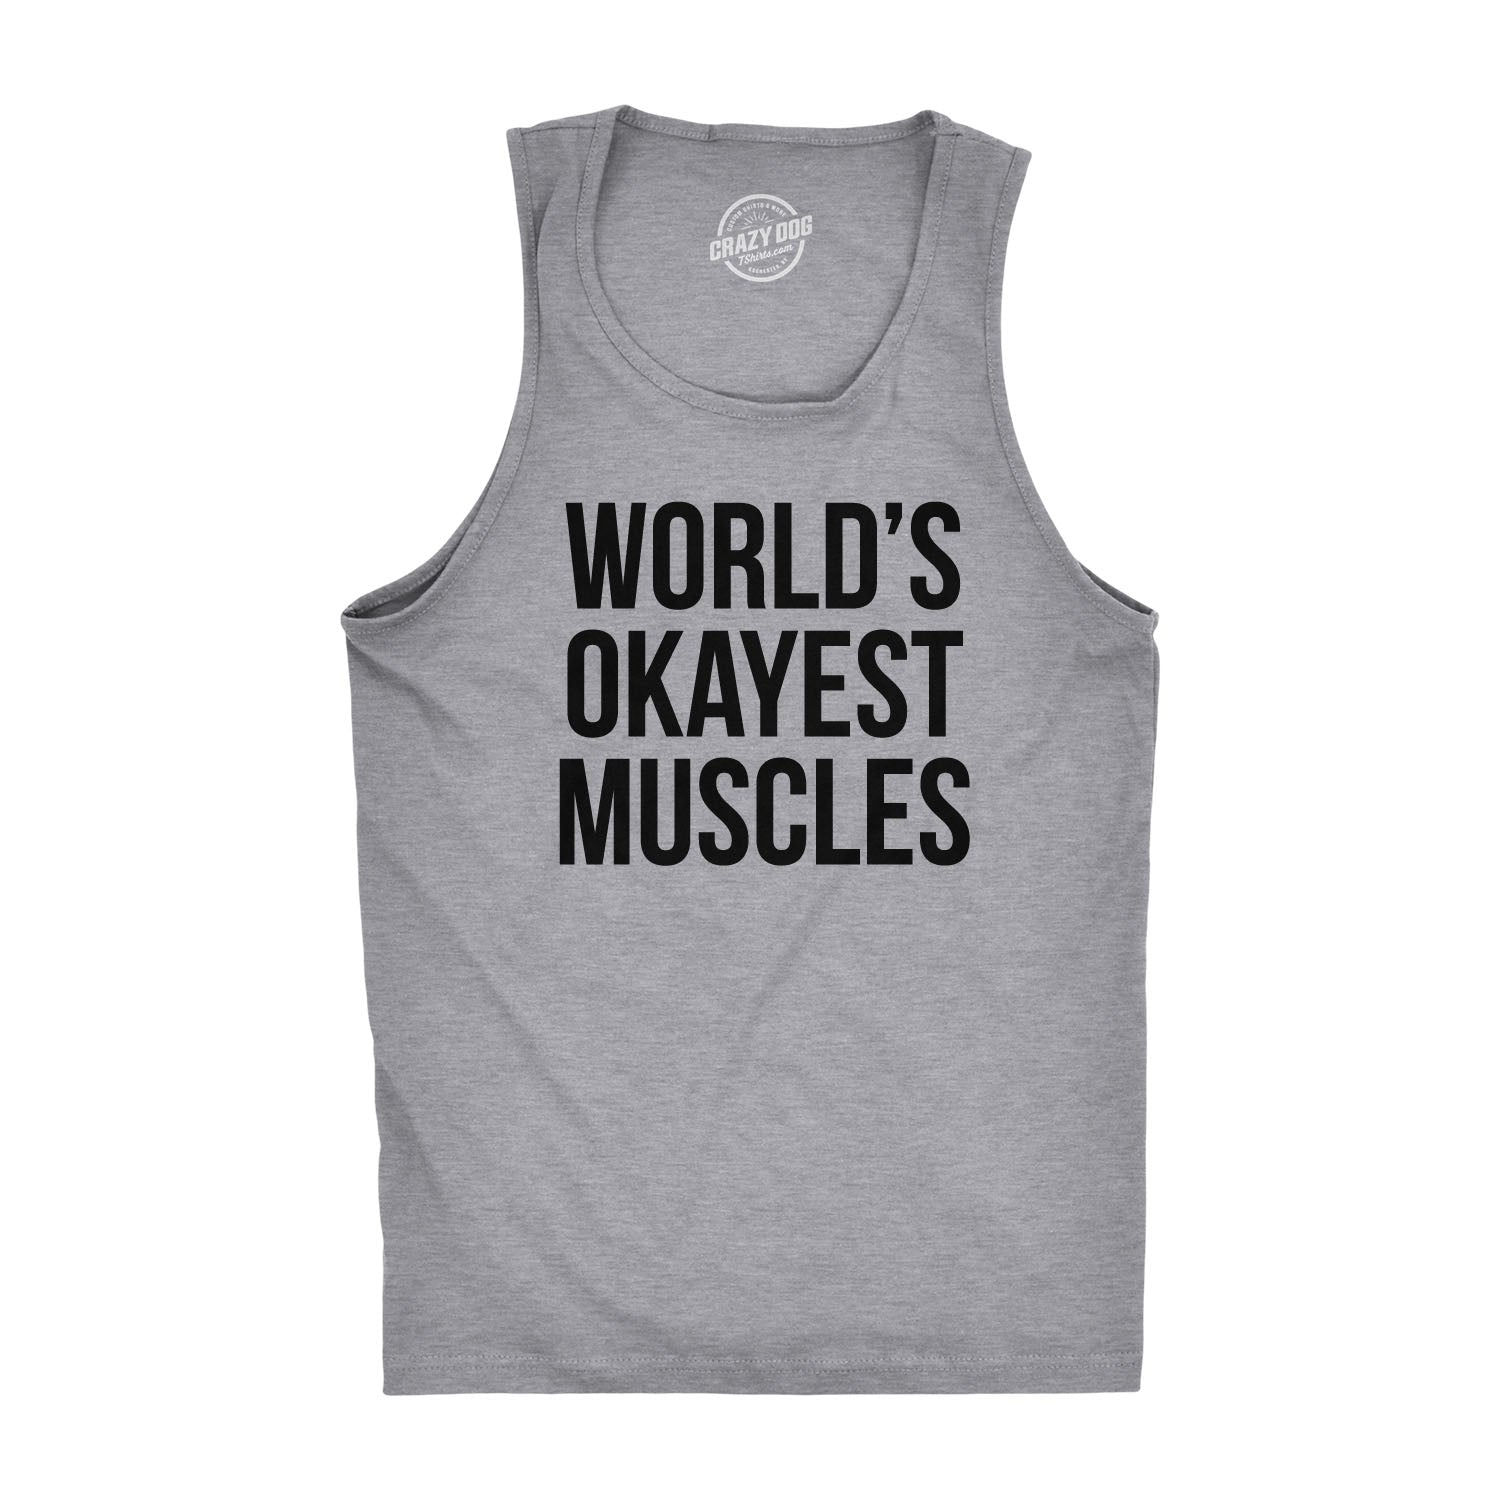 Workout Tank Tops for Women, Workout T-shirts, Funny Workout